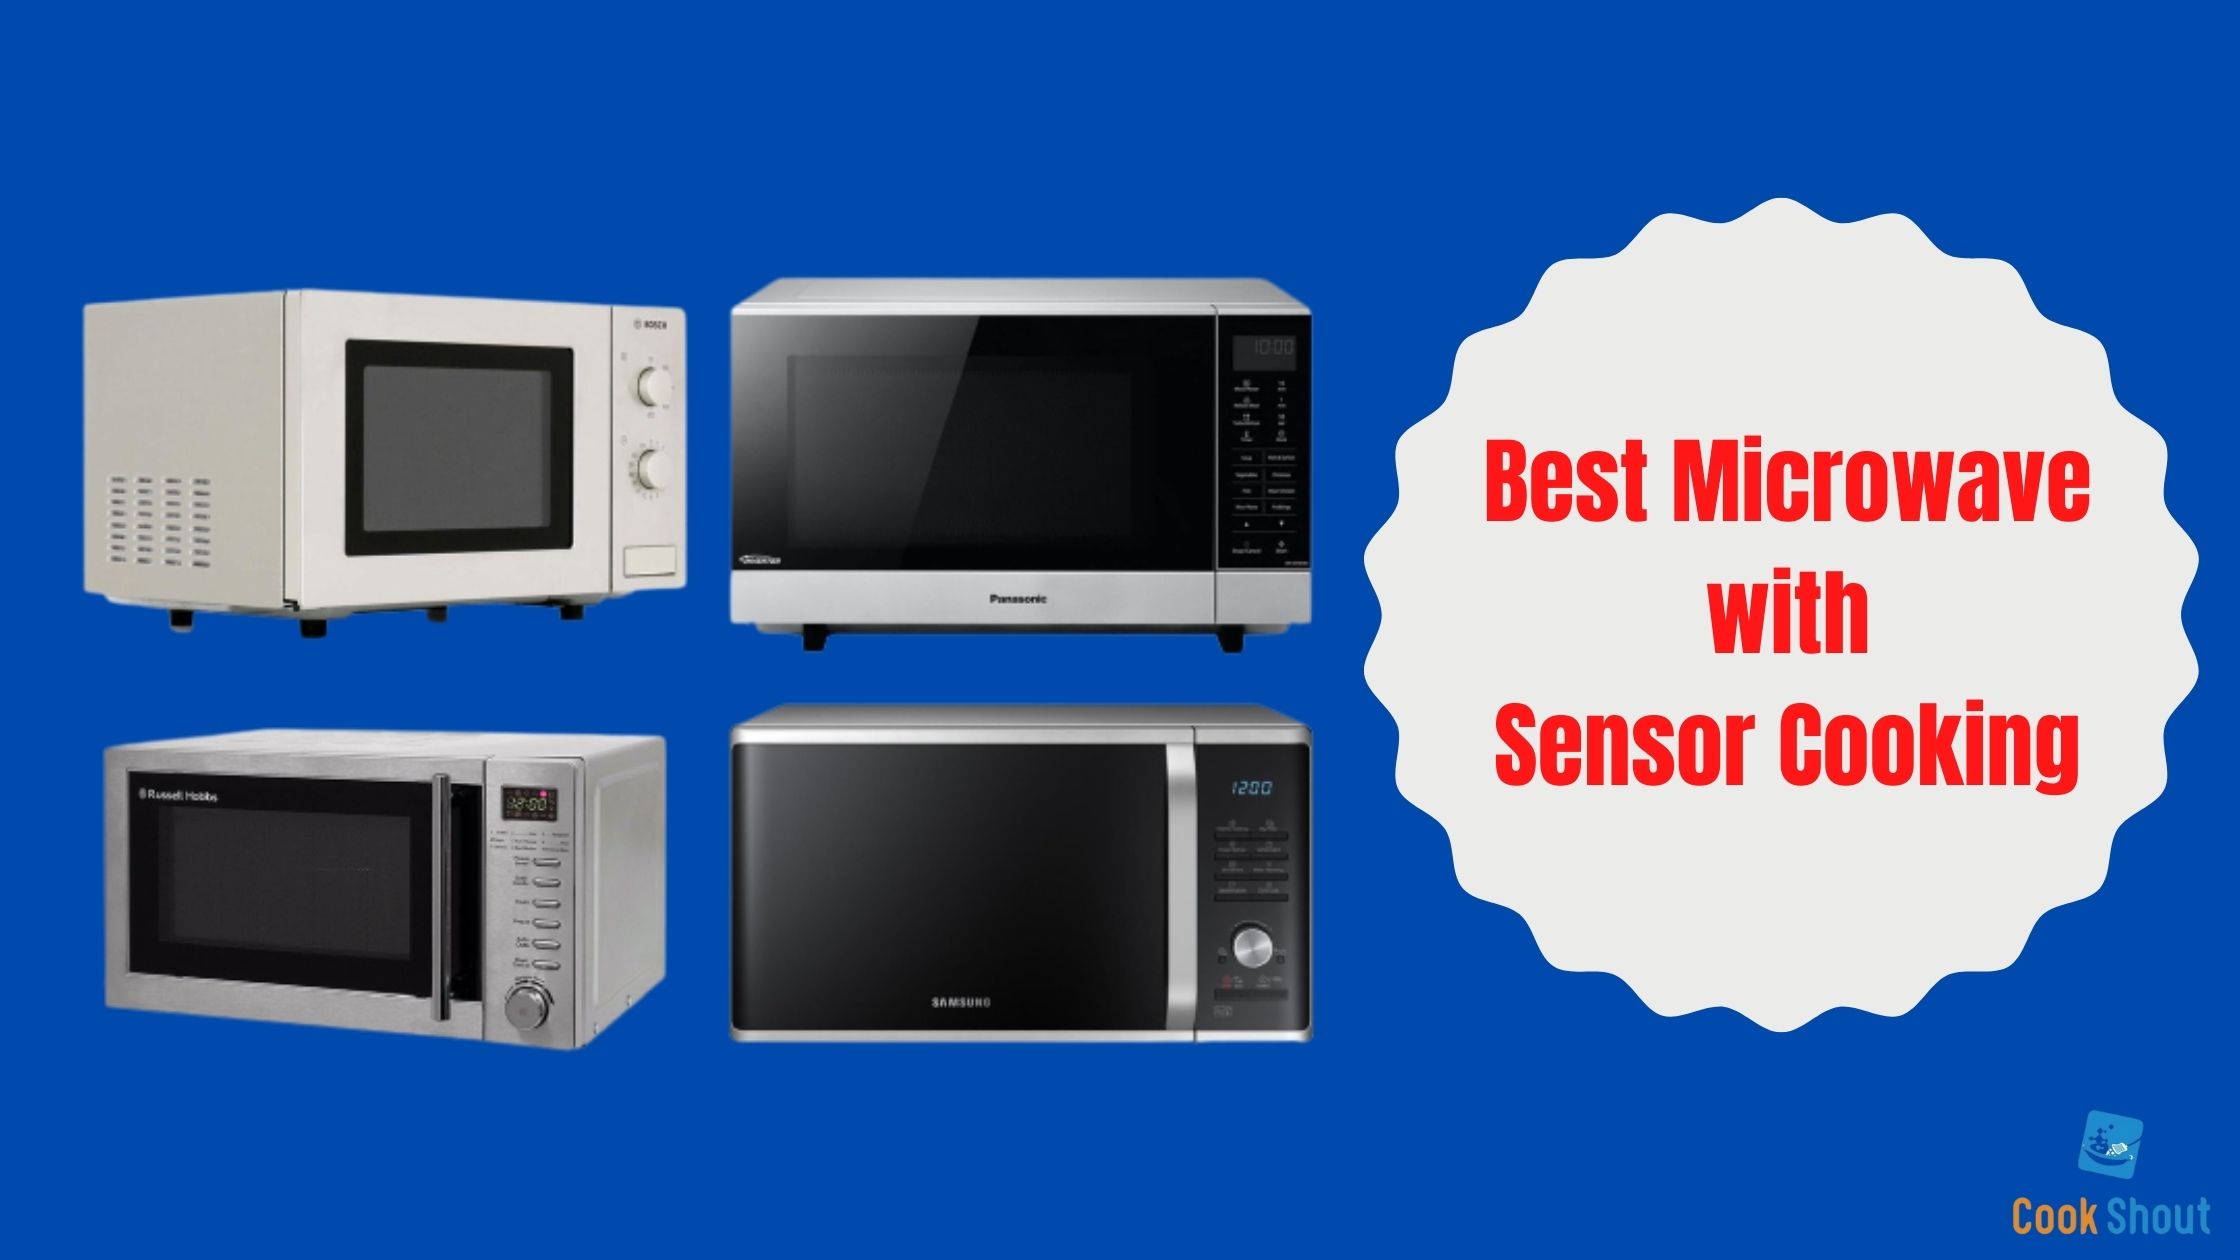 Best Microwave with Sensor Cooking